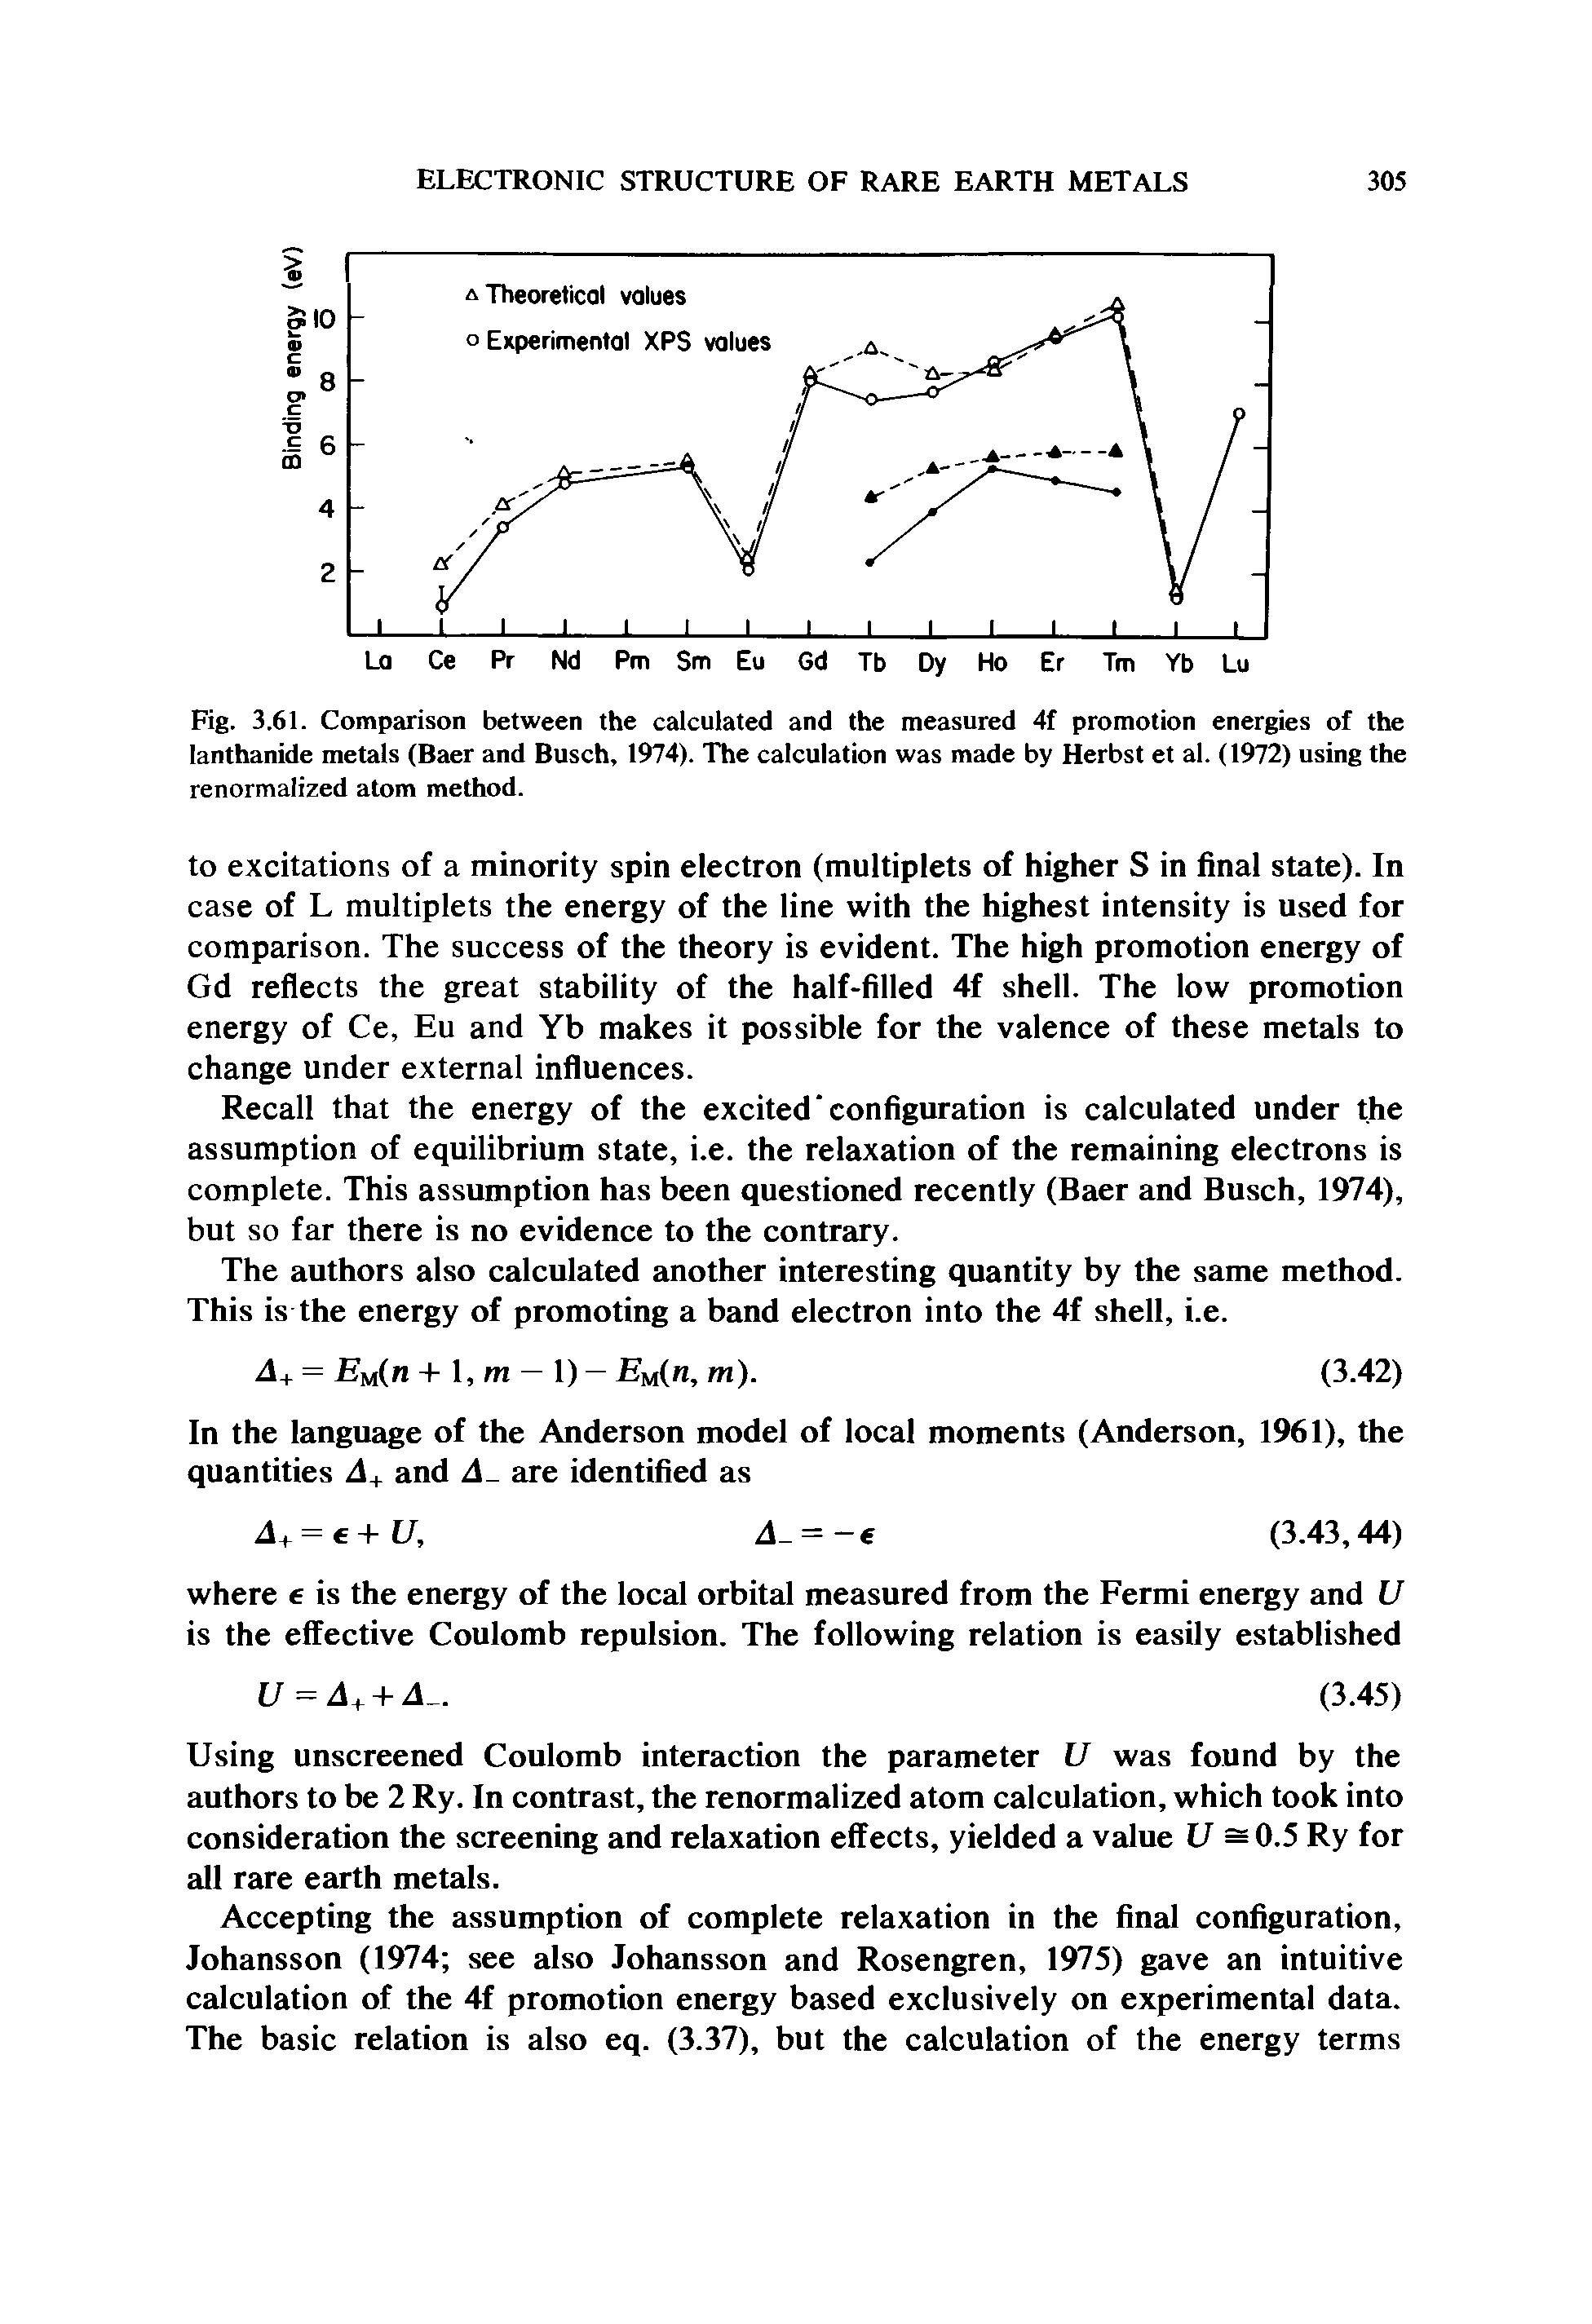 Fig. 3.61. Comparison between the calculated and the measured 4f promotion energies of the lanthanide metals (Baer and Busch, 1974). The calculation was made by Herbst et al. (1972) using the renormalized atom method.